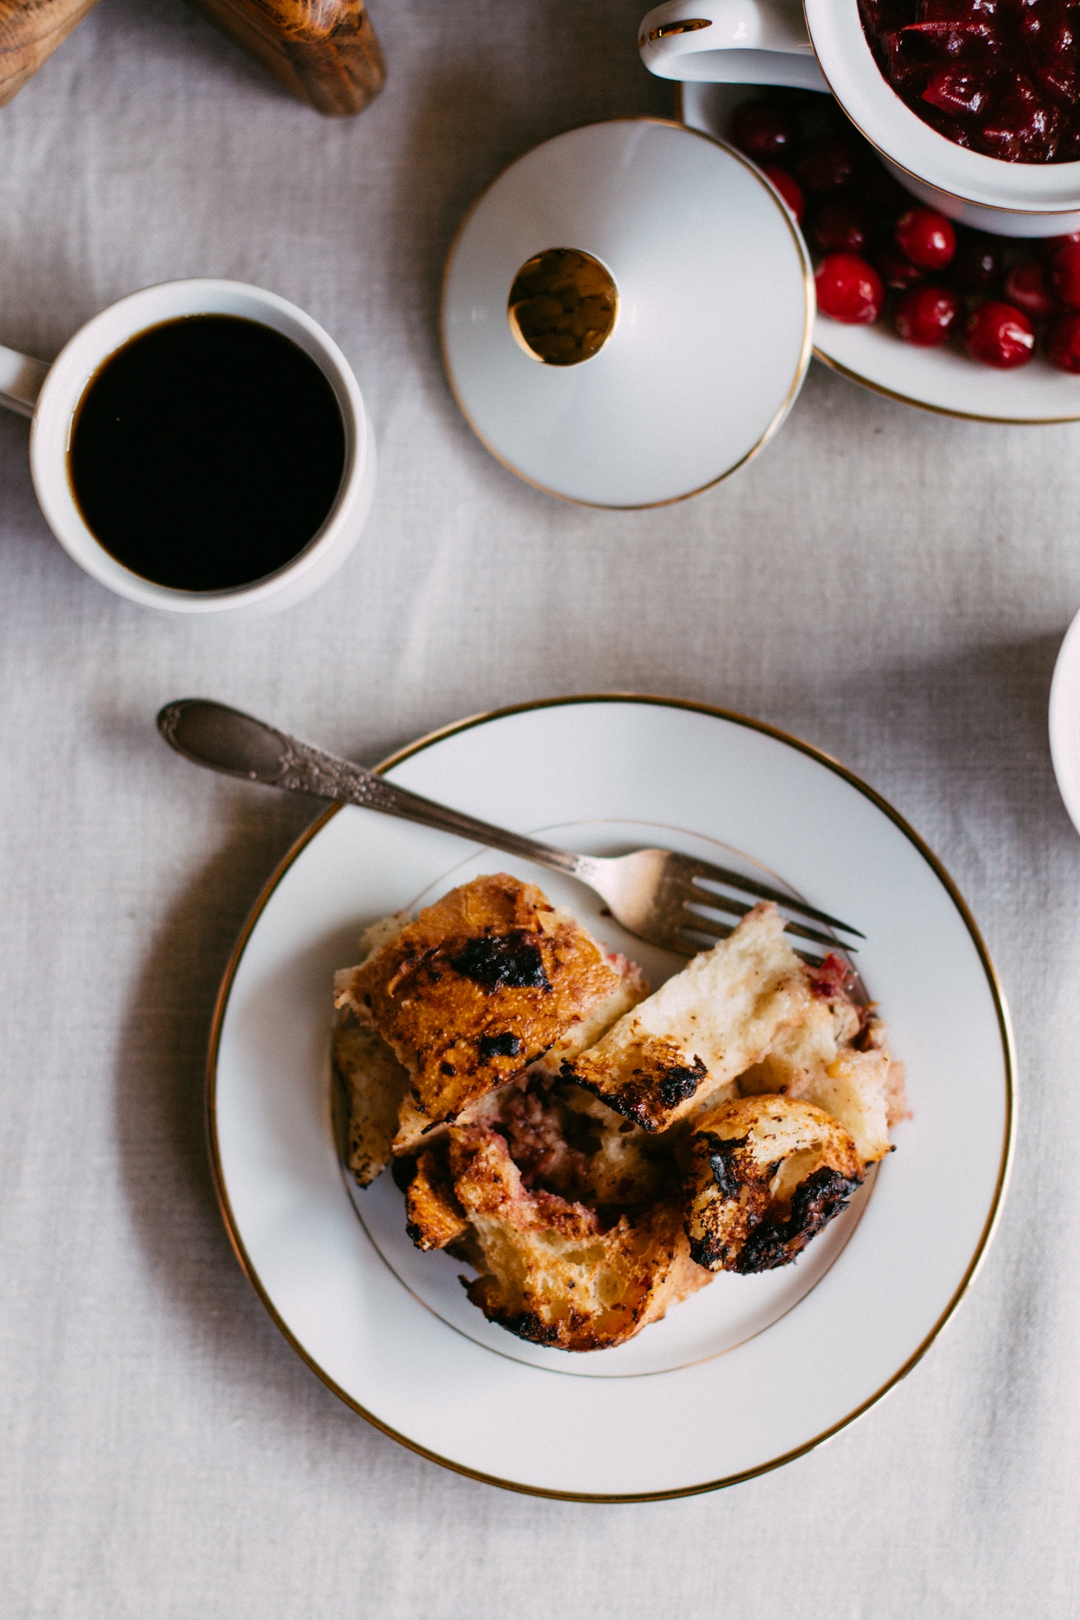 Overhead shot of a serving of savory French toast casserole on a plate surrounded by a coffee cup and cranberry sauce.